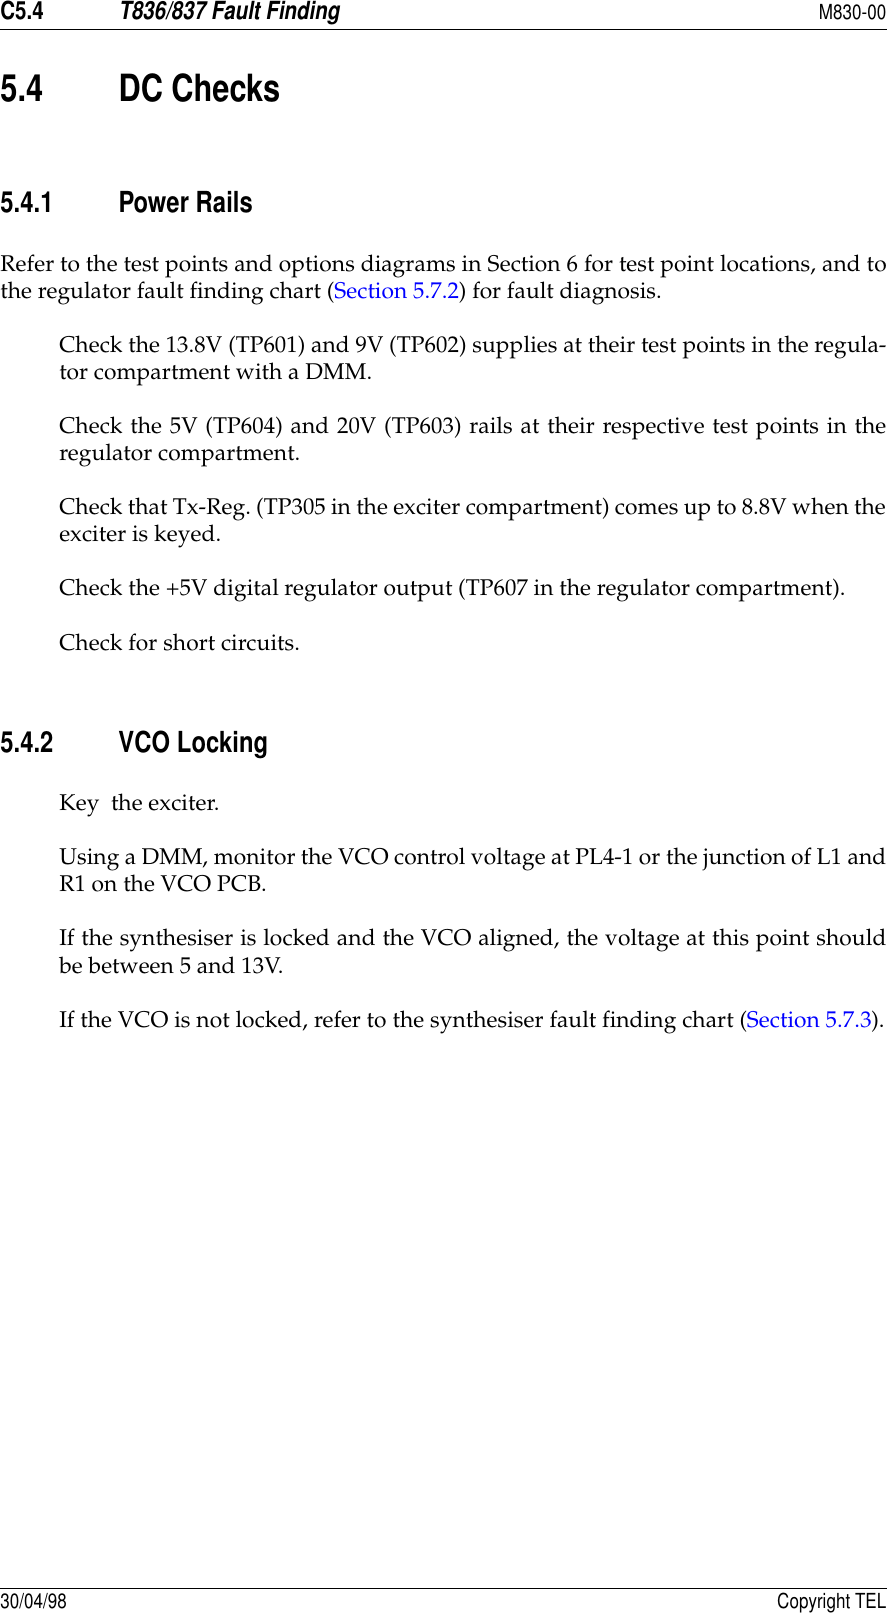 C5.4T836/837 Fault FindingM830-0030/04/98 Copyright TEL5.4 DC Checks5.4.1 Power RailsRefer to the test points and options diagrams in Section 6 for test point locations, and tothe regulator fault finding chart (Section 5.7.2) for fault diagnosis.Check the 13.8V (TP601) and 9V (TP602) supplies at their test points in the regula-tor compartment with a DMM.Check the 5V (TP604) and 20V (TP603) rails at their respective test points in theregulator compartment.Check that Tx-Reg. (TP305 in the exciter compartment) comes up to 8.8V when theexciter is keyed.Check the +5V digital regulator output (TP607 in the regulator compartment).Check for short circuits.5.4.2 VCO LockingKey  the exciter.Using a DMM, monitor the VCO control voltage at PL4-1 or the junction of L1 andR1 on the VCO PCB.If the synthesiser is locked and the VCO aligned, the voltage at this point shouldbe between 5 and 13V.If the VCO is not locked, refer to the synthesiser fault finding chart (Section 5.7.3).